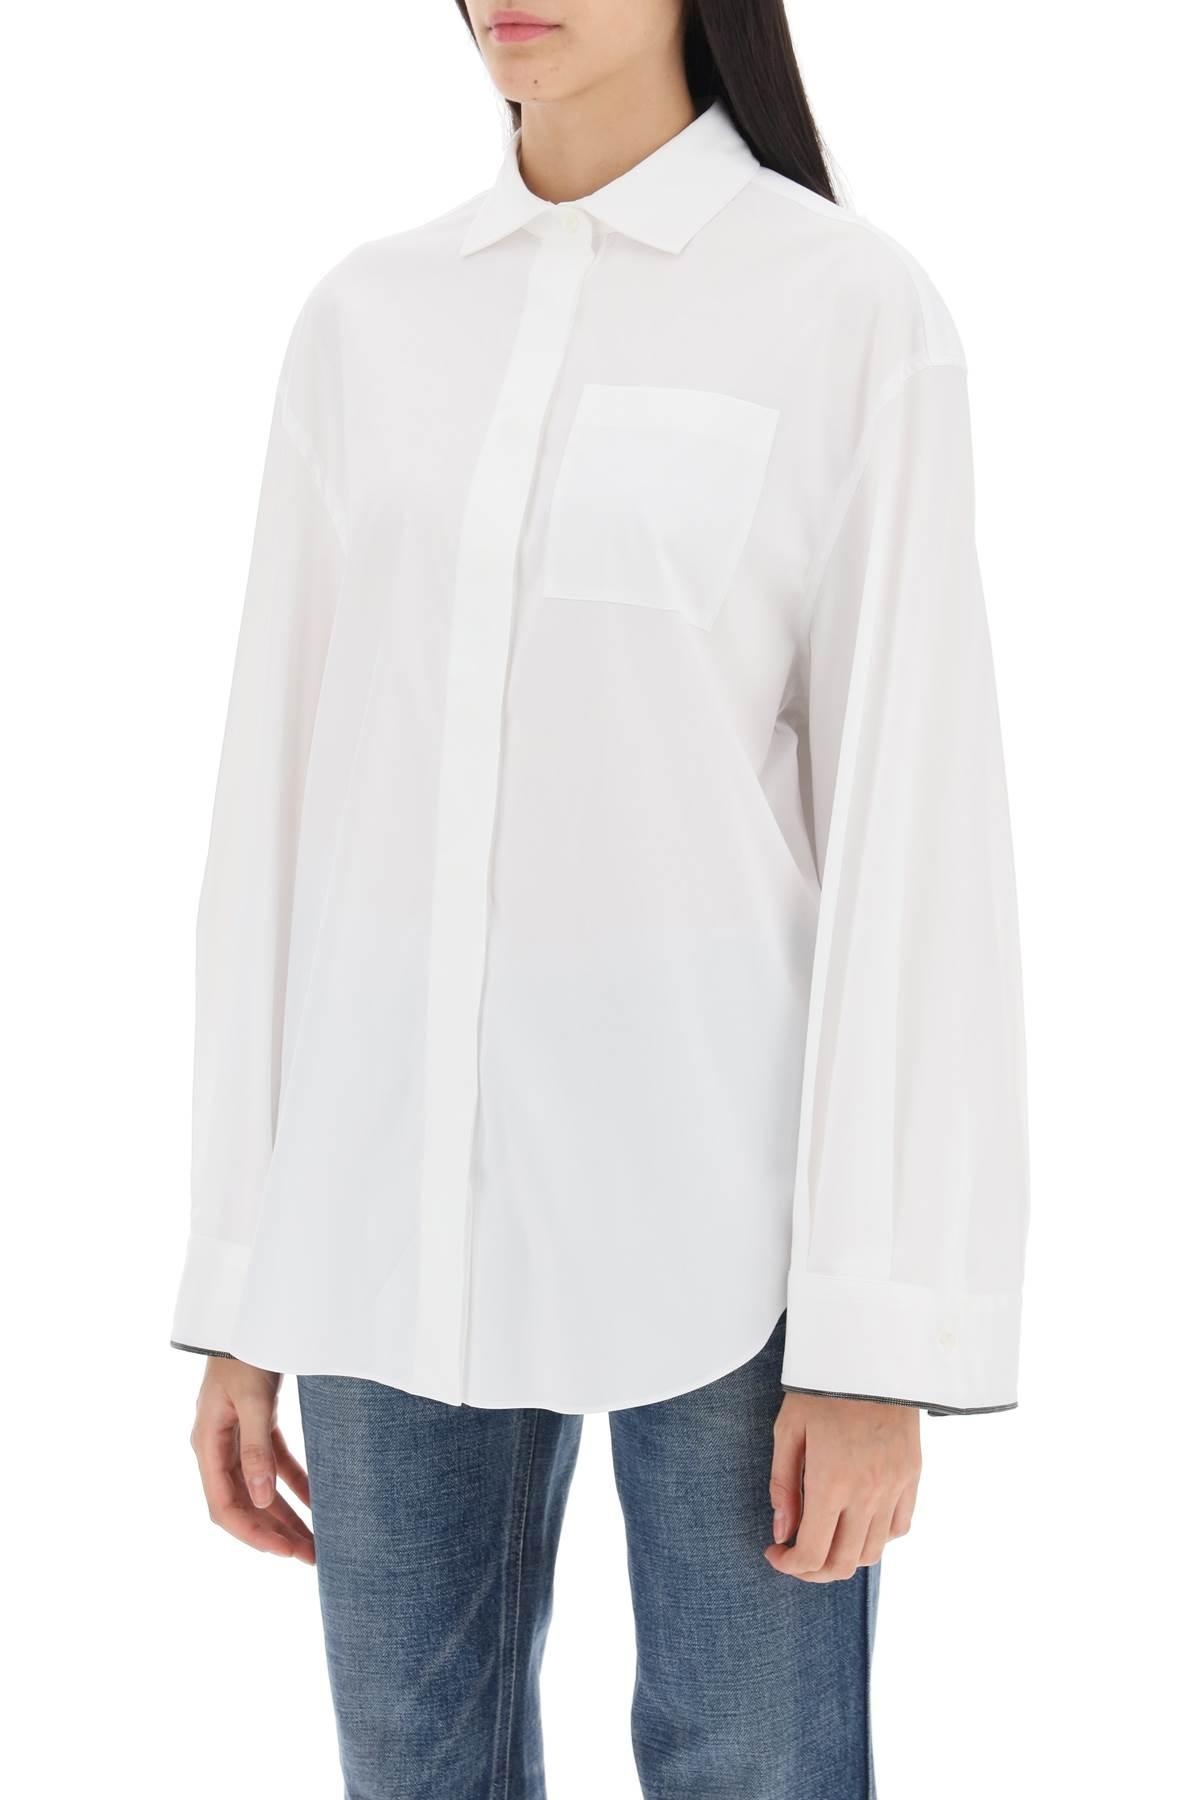 WIDE SLEEVE SHIRT WITH SHINY CUFF DETAILS - 5